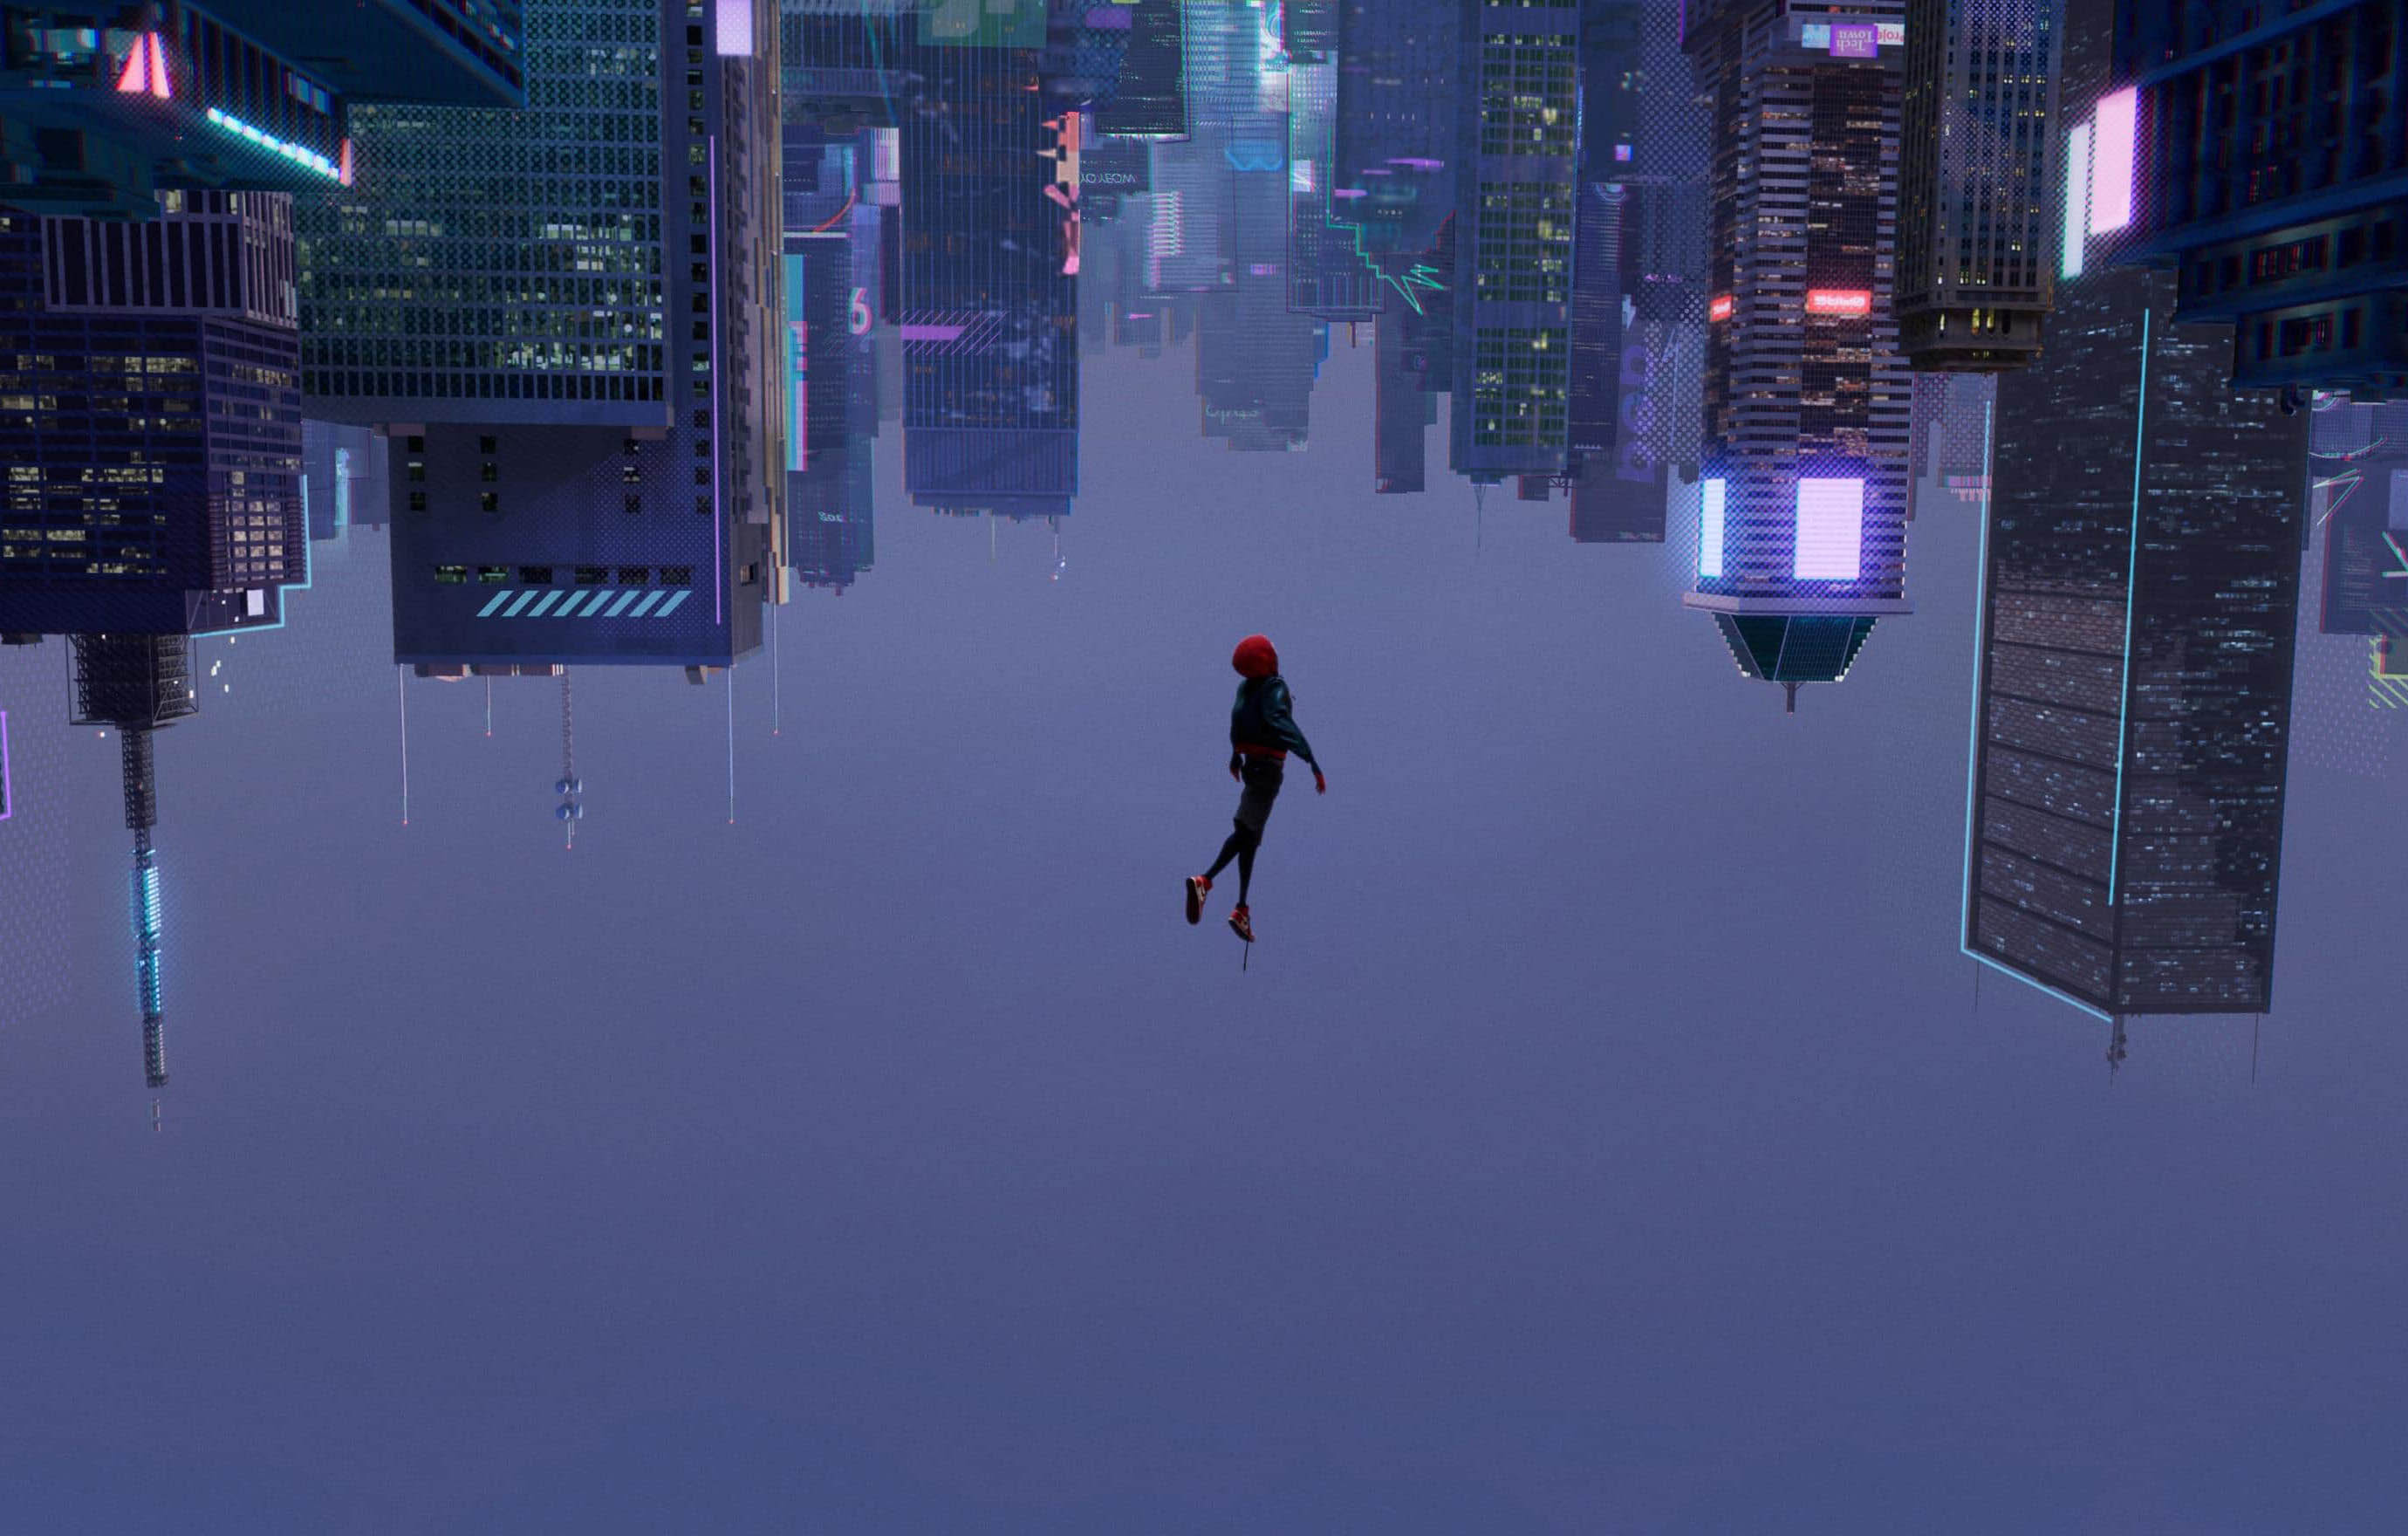 Into the Spider-Verse Film Review